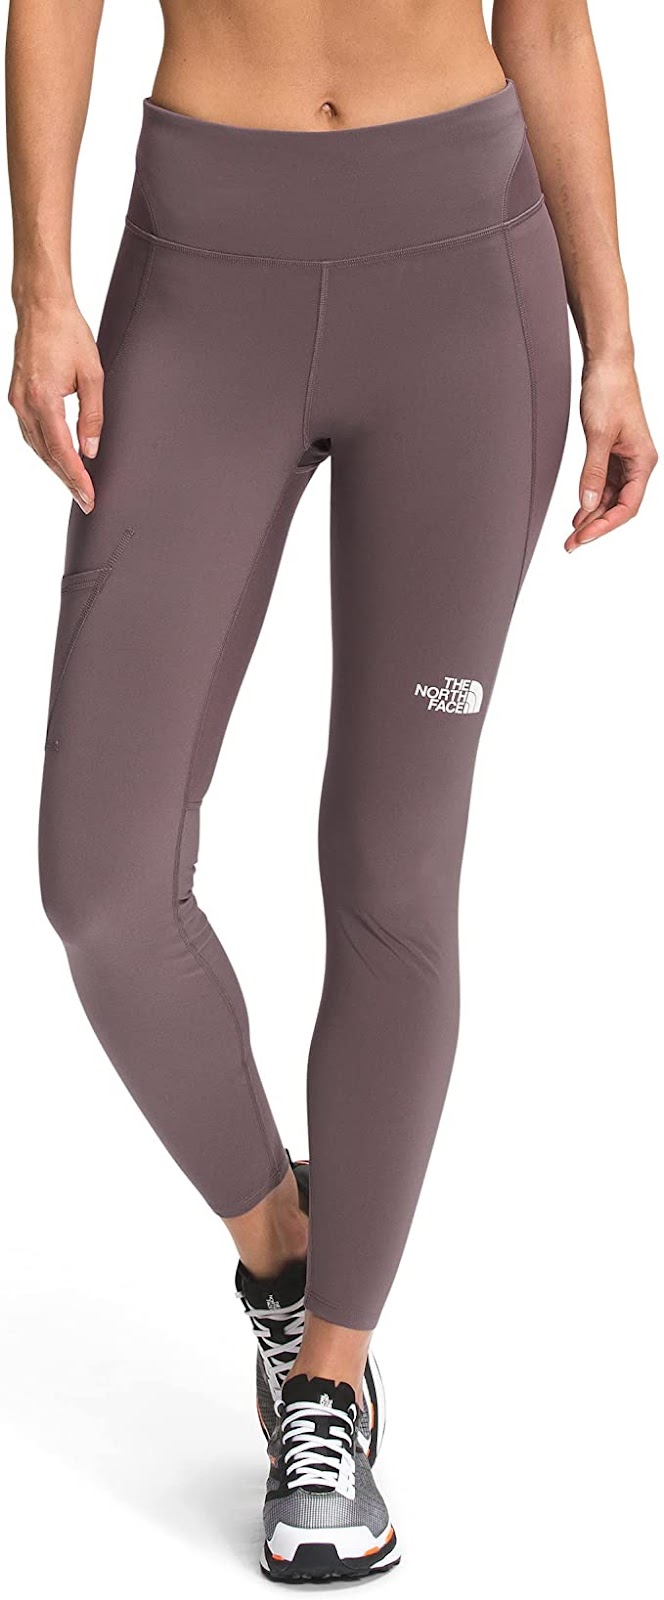 The North Face Winter Warm Tight Womens Baselayer Pants